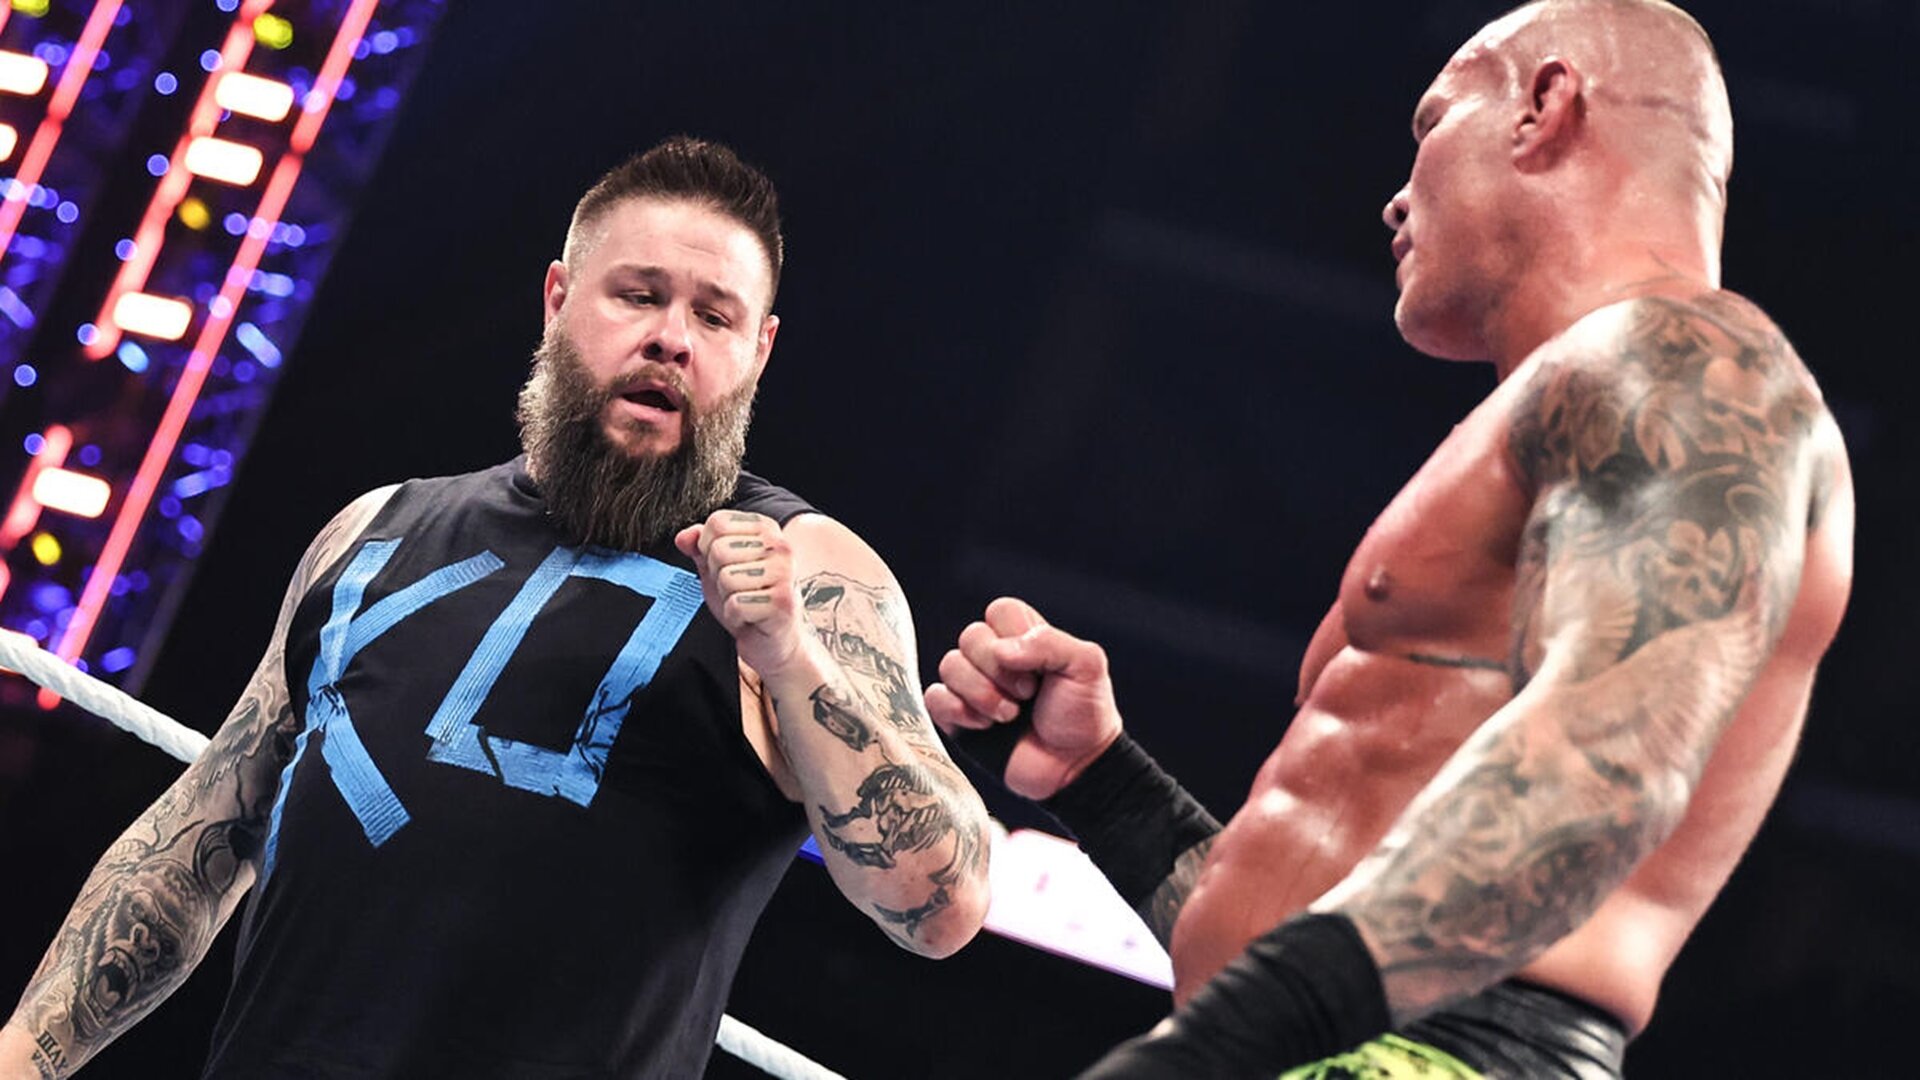 Randy Orton & Kevin Owens tease forming a new tag team in WWE